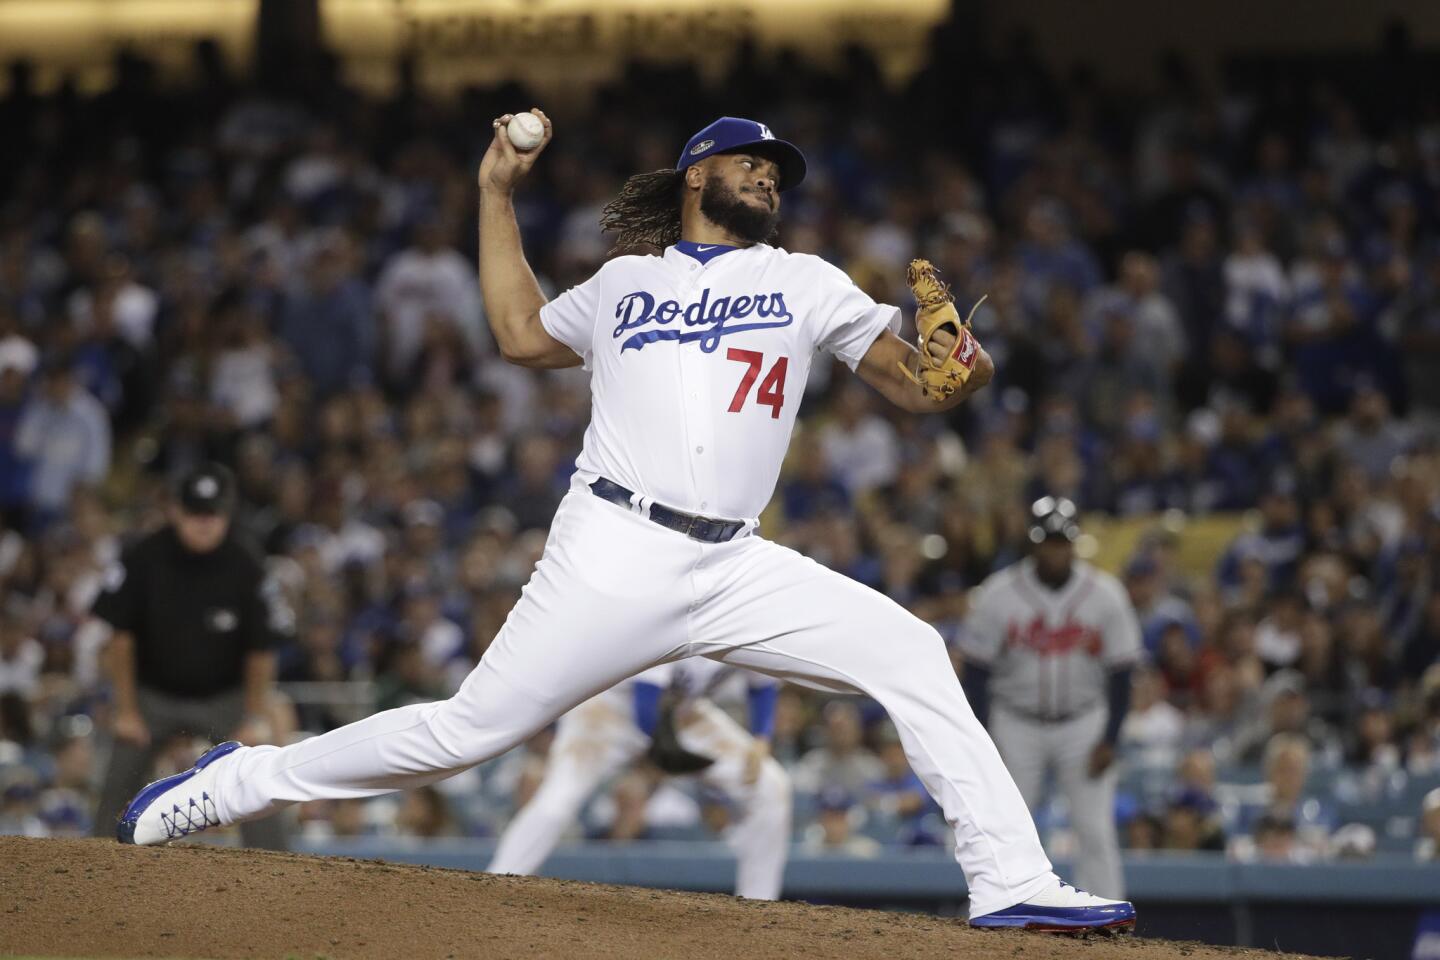 Los Angeles Dodgers' Kenley Jansen throws against the Atlanta Braves during the ninth inning of Game 2 of the National League Division Series Friday, Oct. 5, 2018, in Los Angeles. (AP Photo/Jae C. Hong)